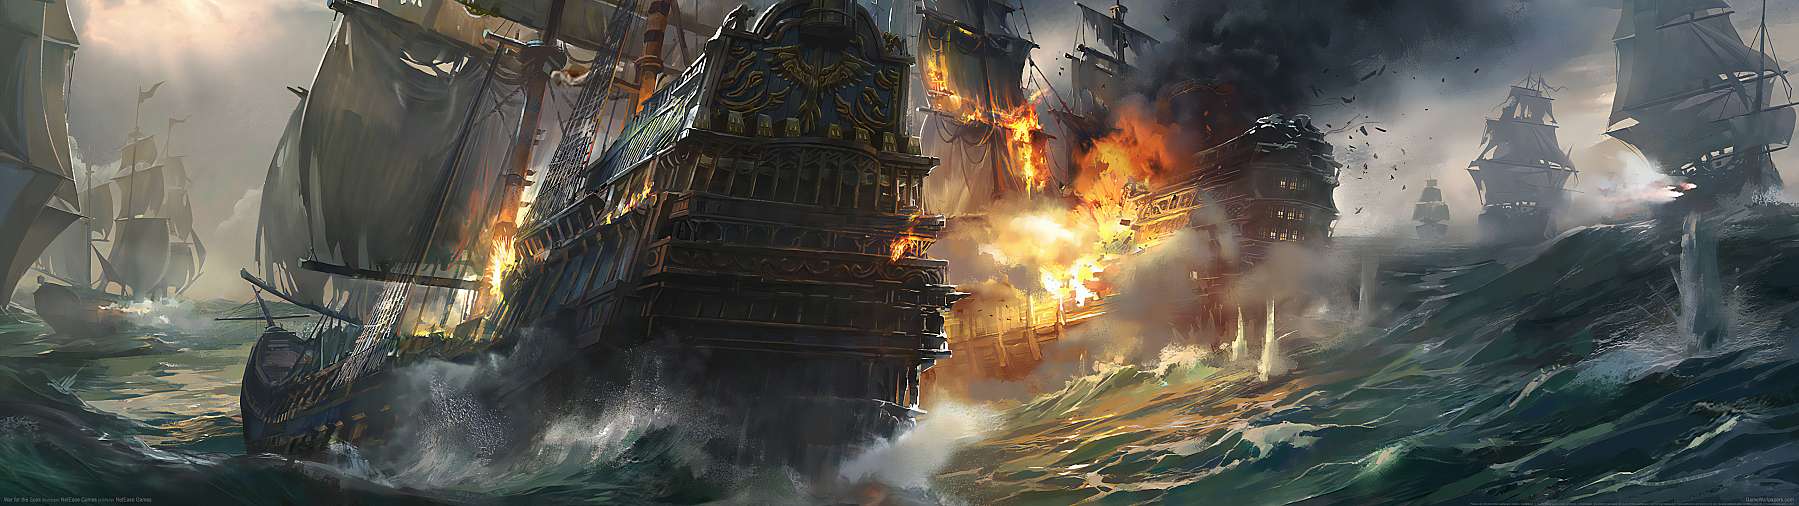 War of the Seas wallpaper or background